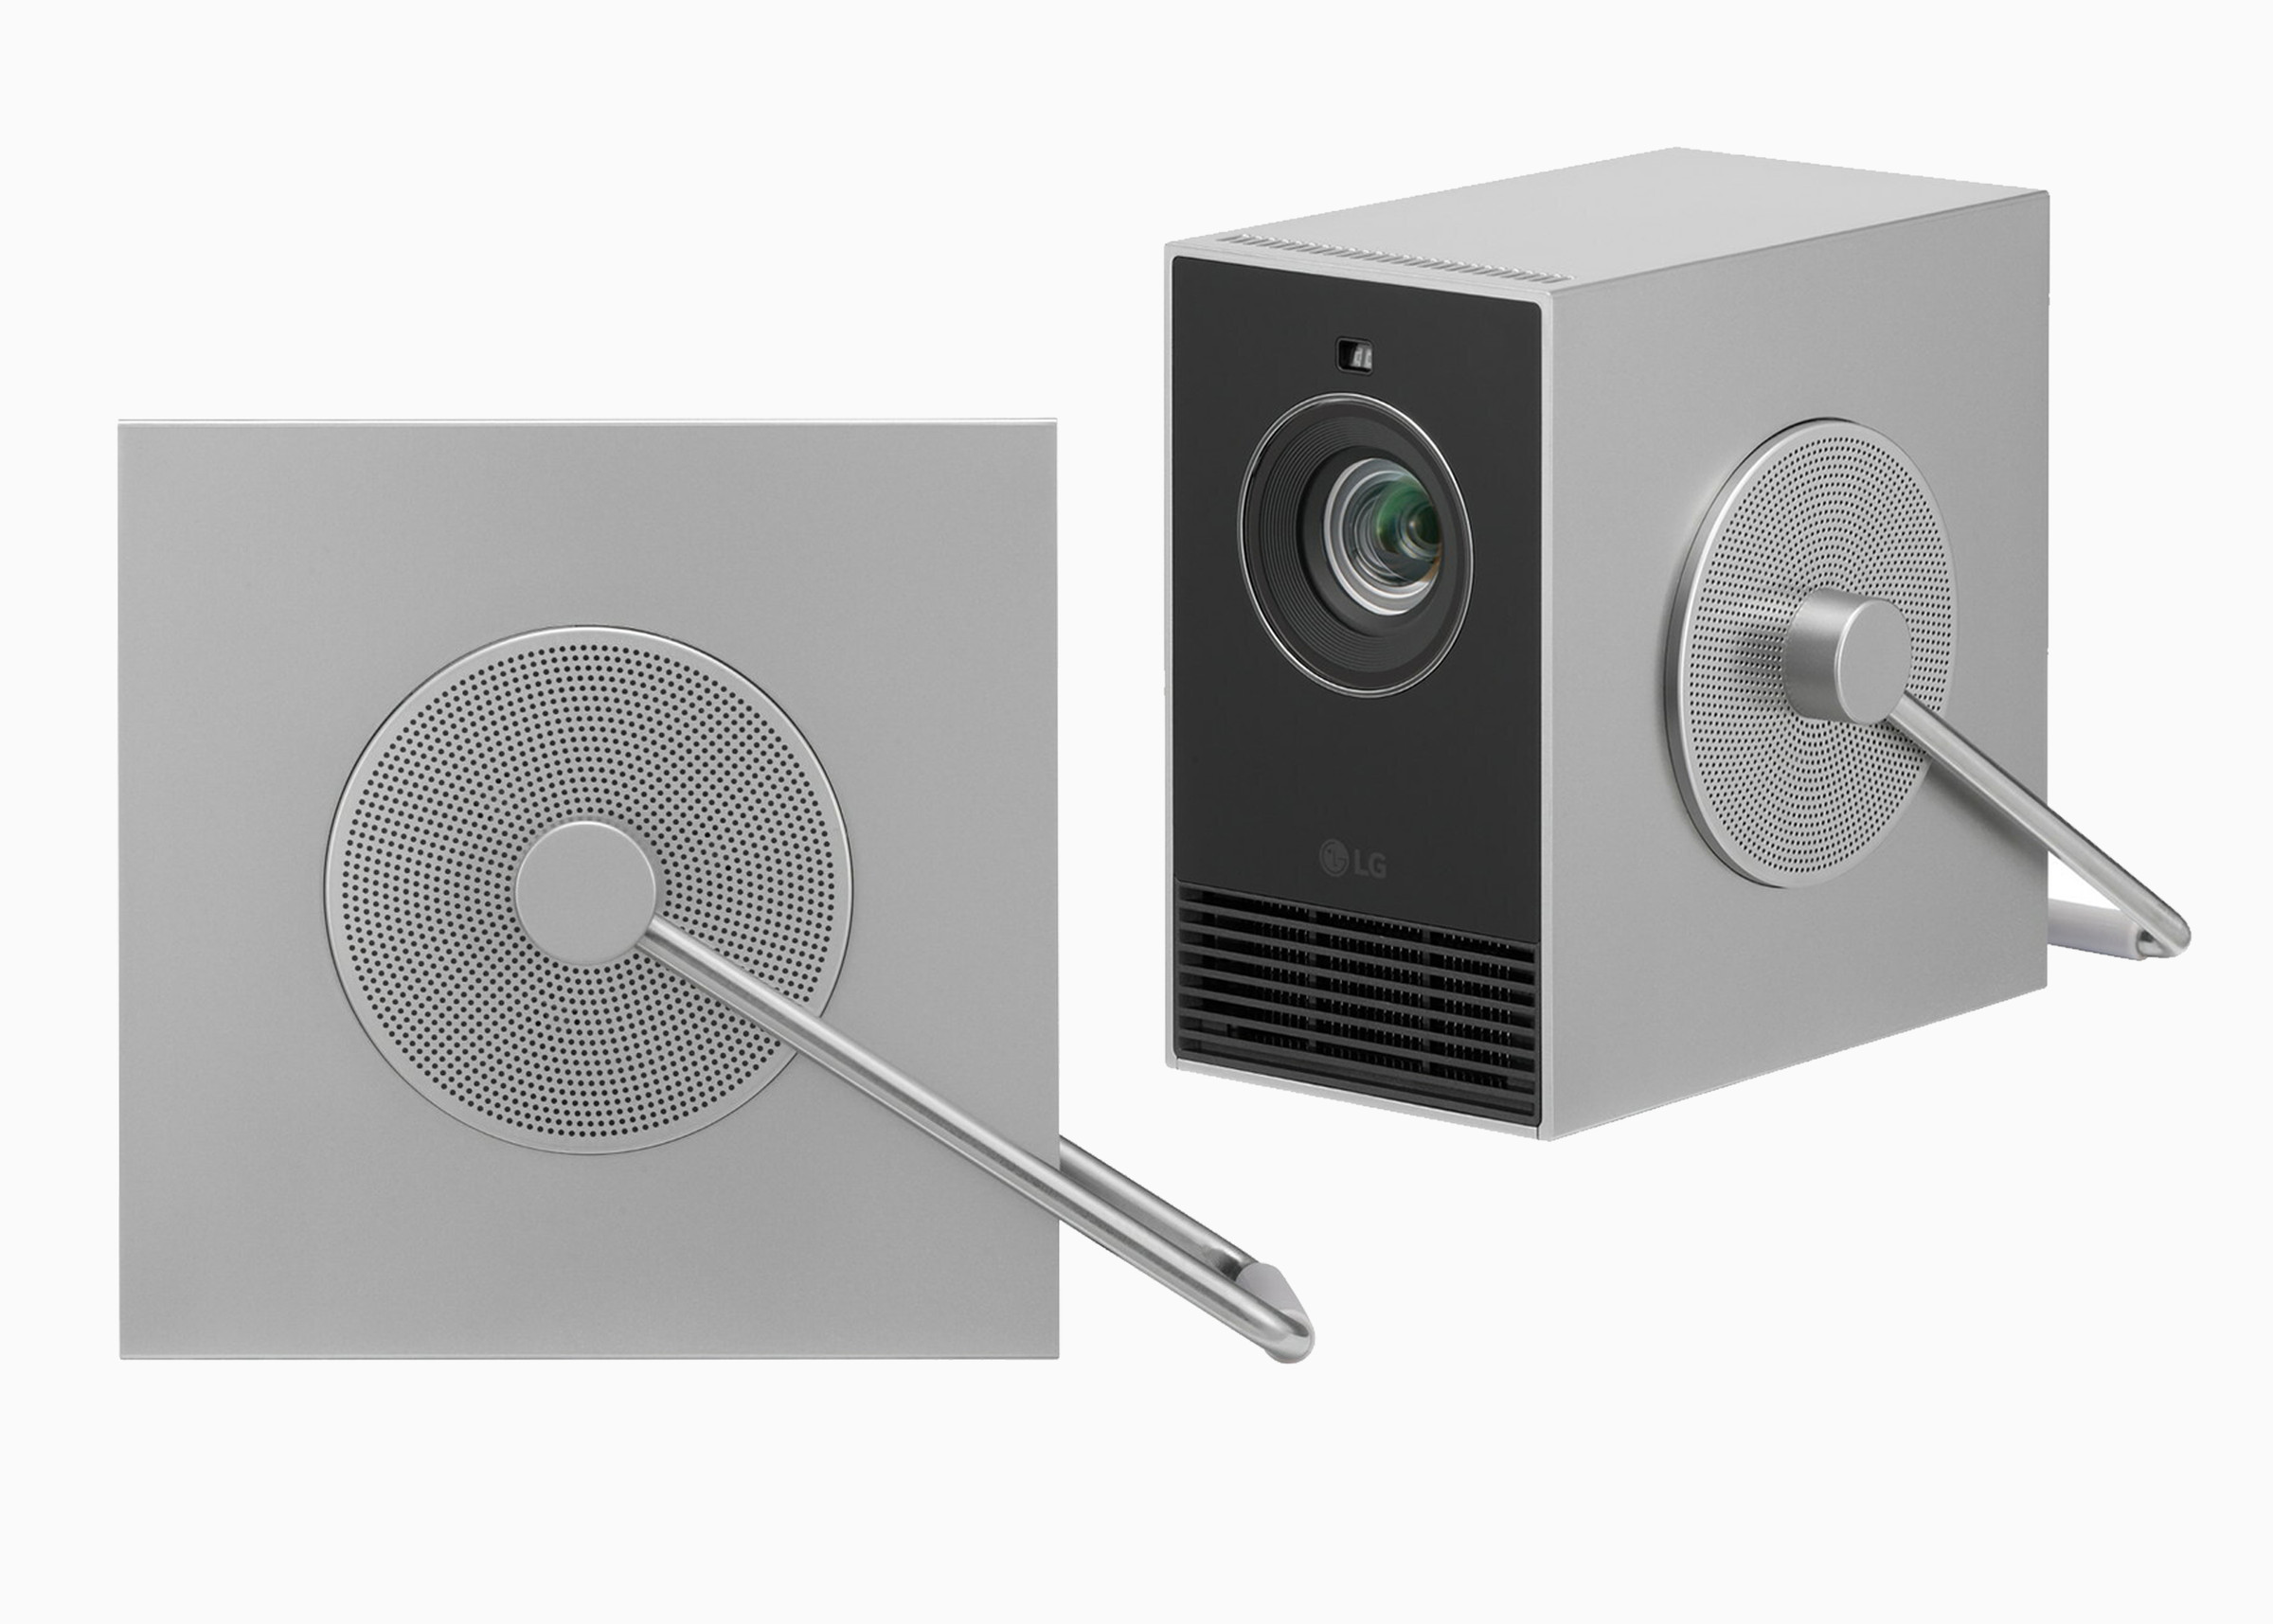 A picture of the Qube in profile and three-quarter view. The profile image highlights the circular surround where the handle attaches to its side. The surround is filled with tiny holes arranged like those on a speaker grille.